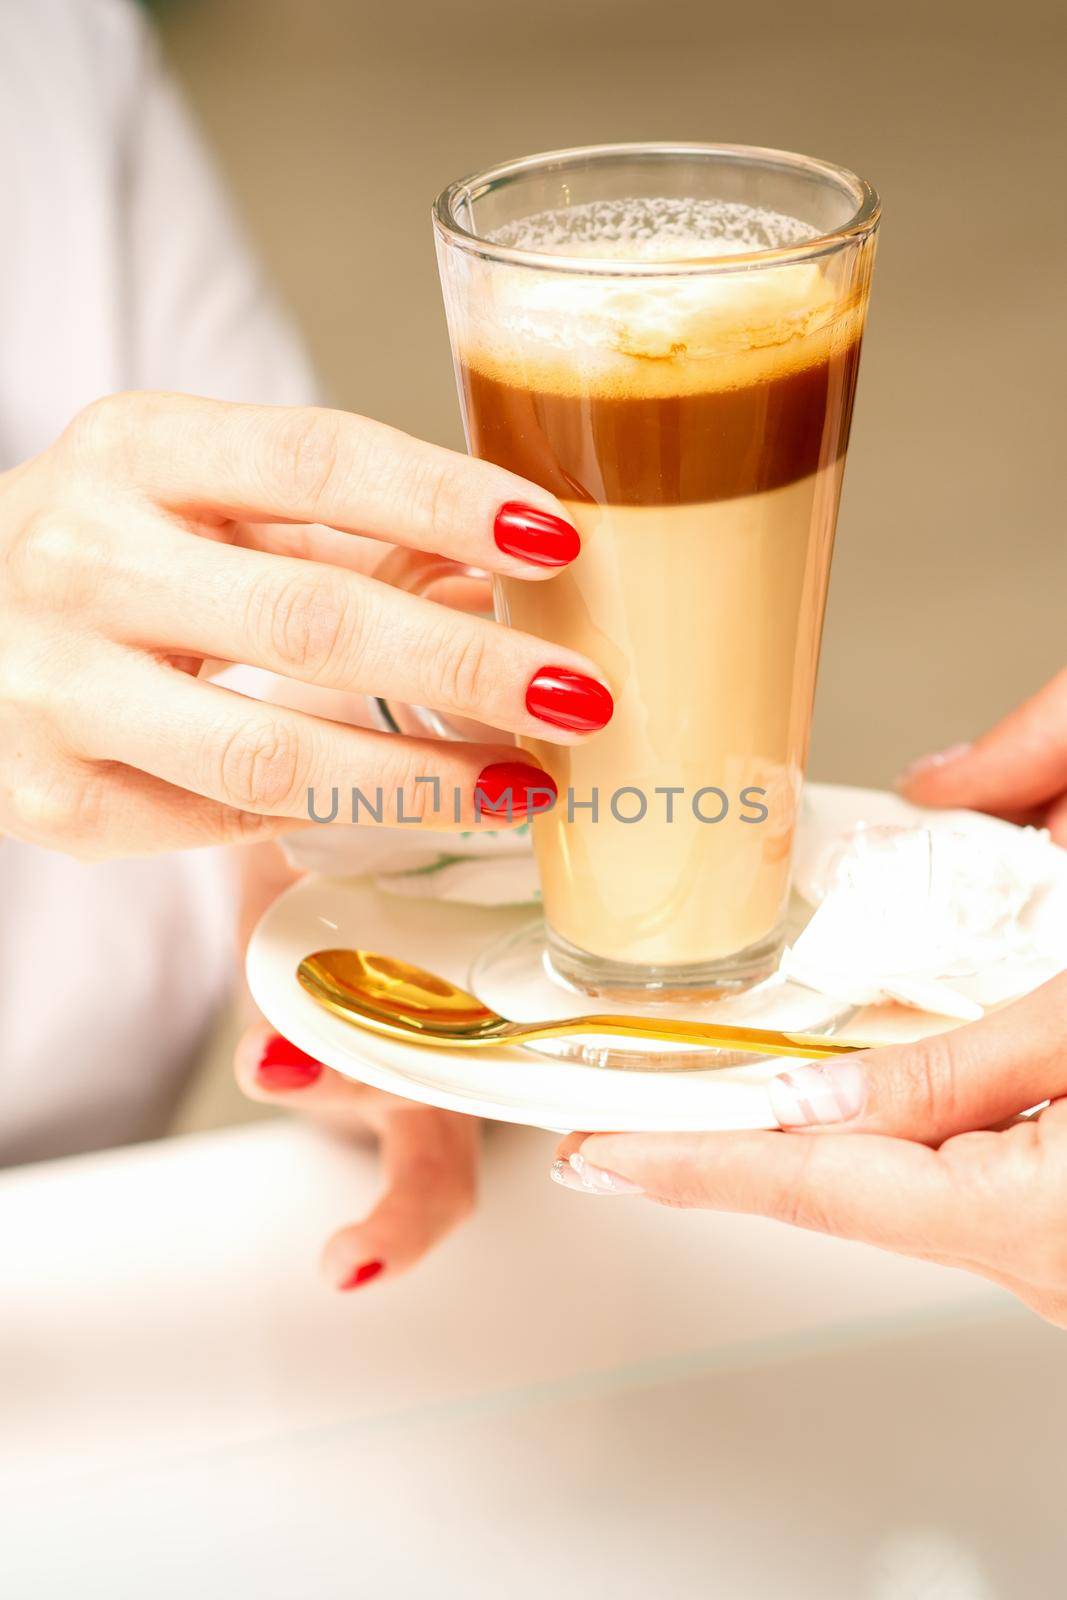 Barista serving coffee latte in glass mug for a customer, close up hands